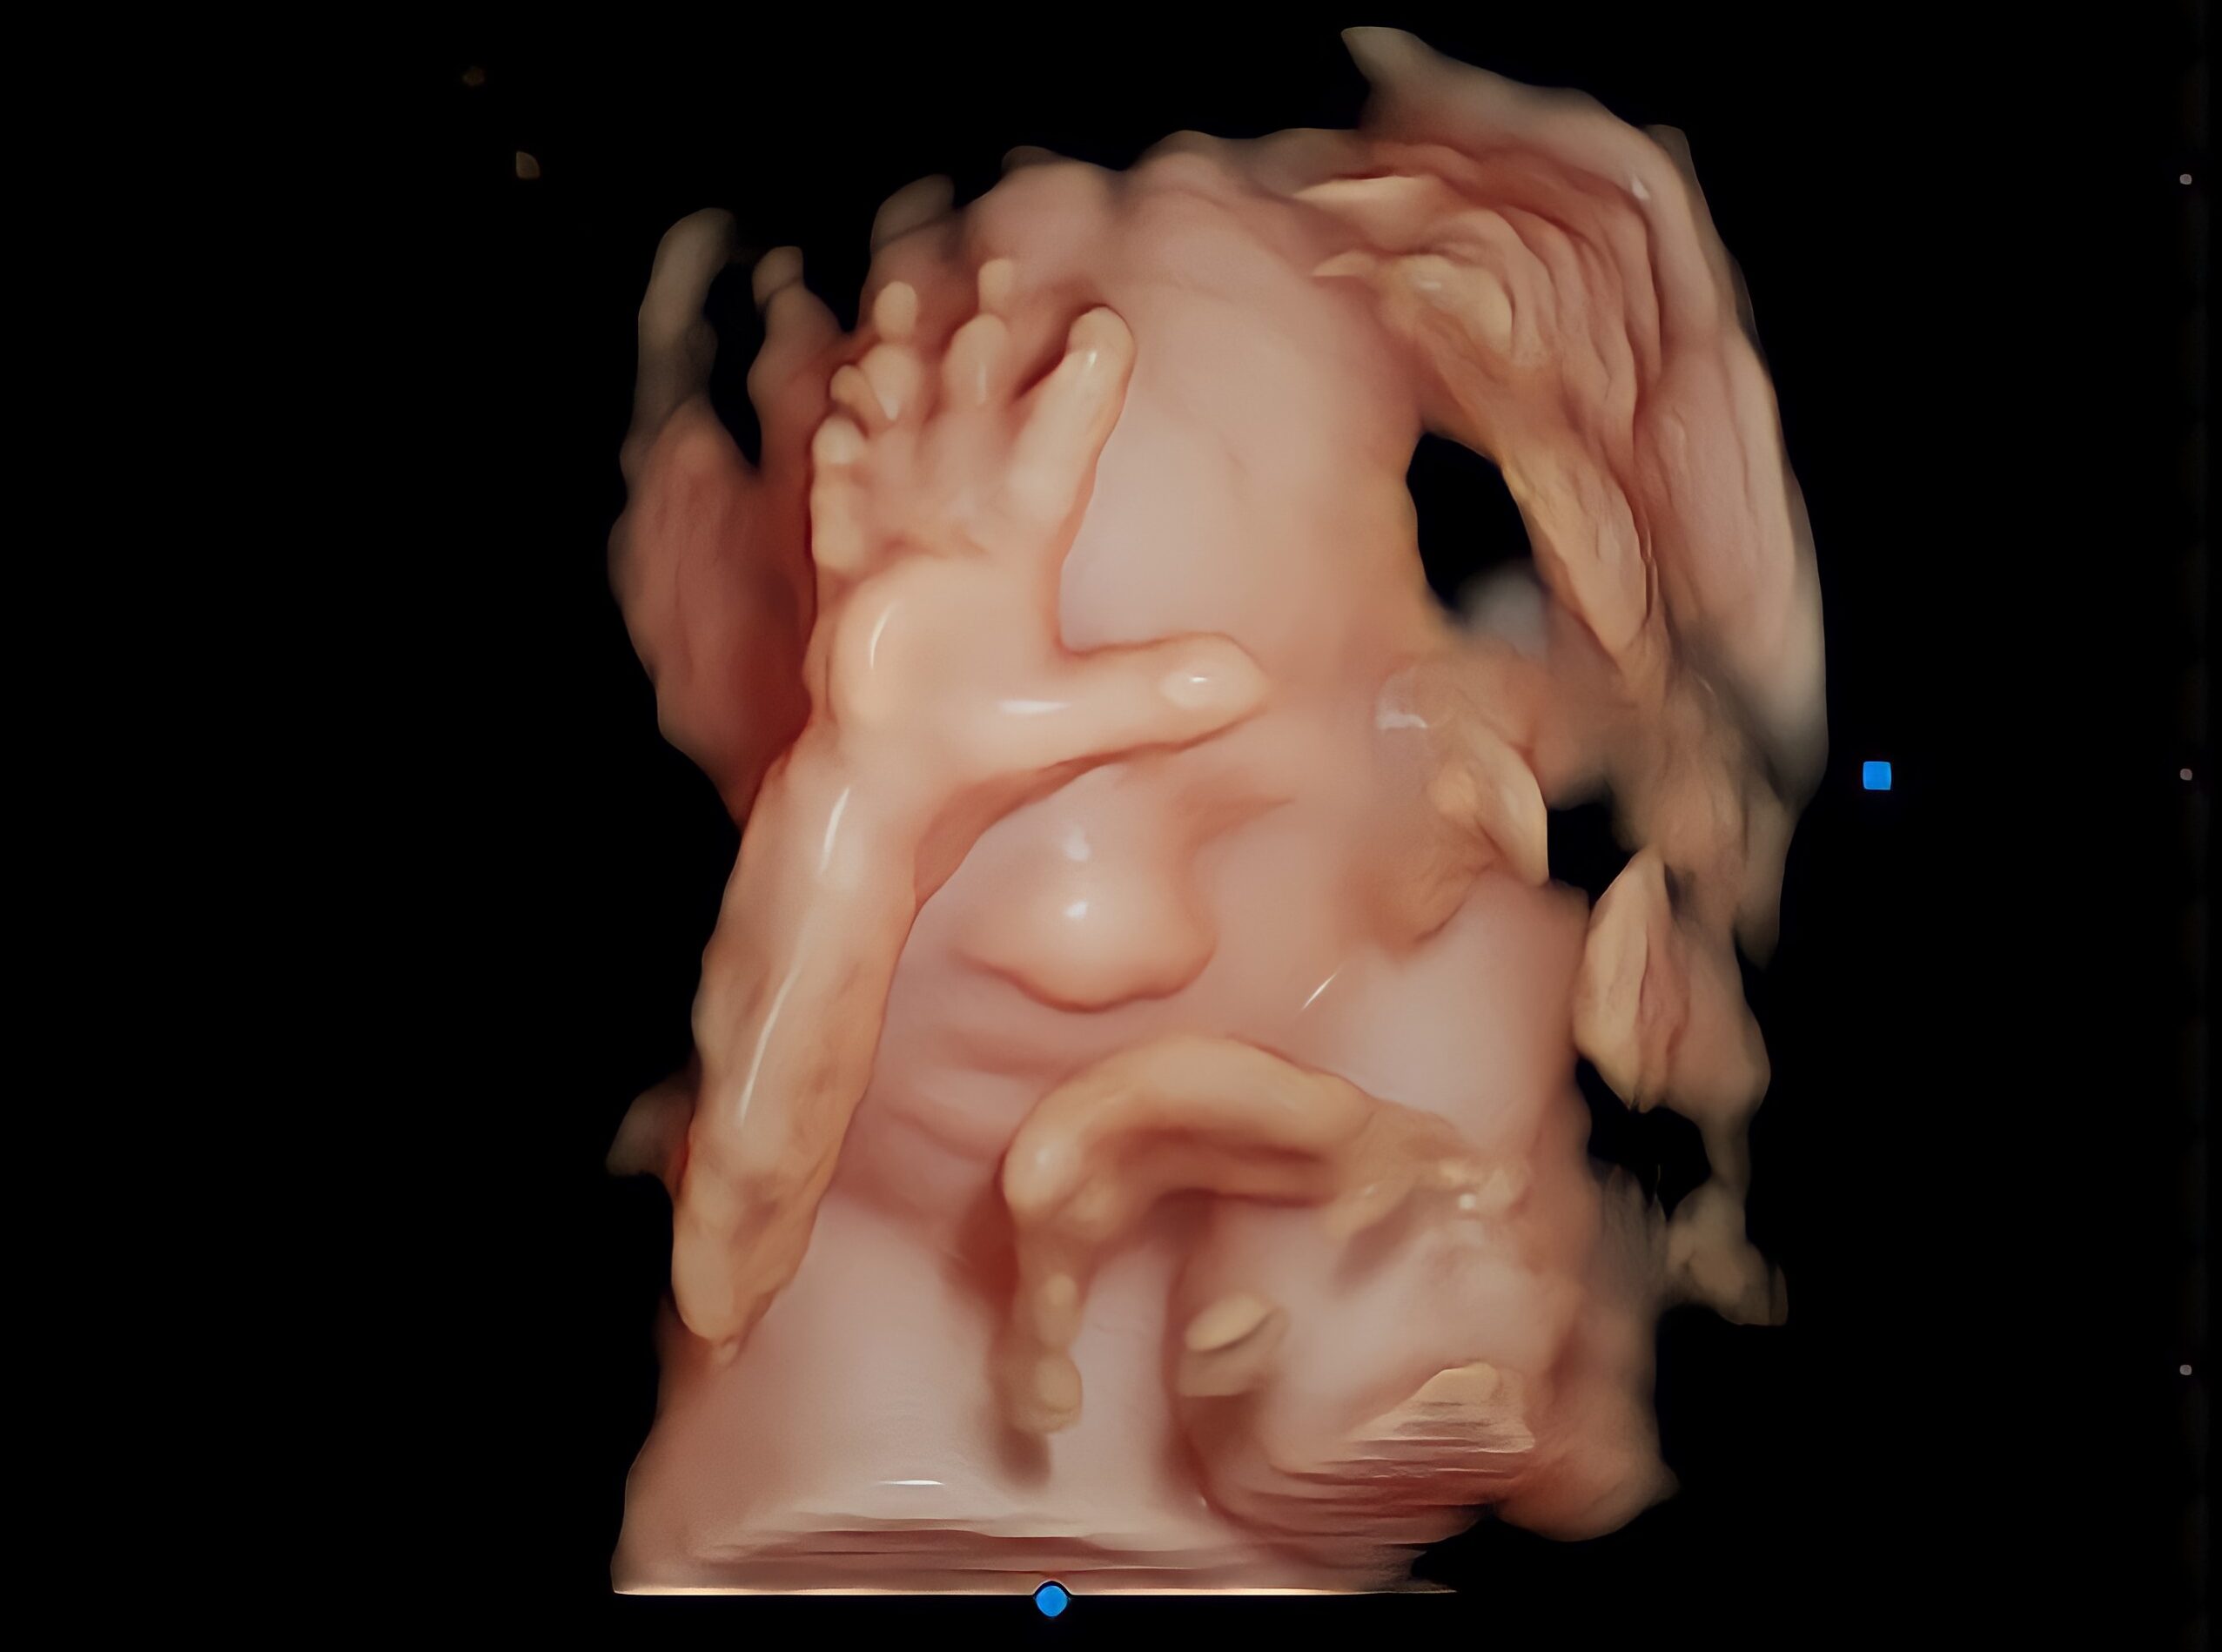 Baby's Hand in 3D 4D ultrasound